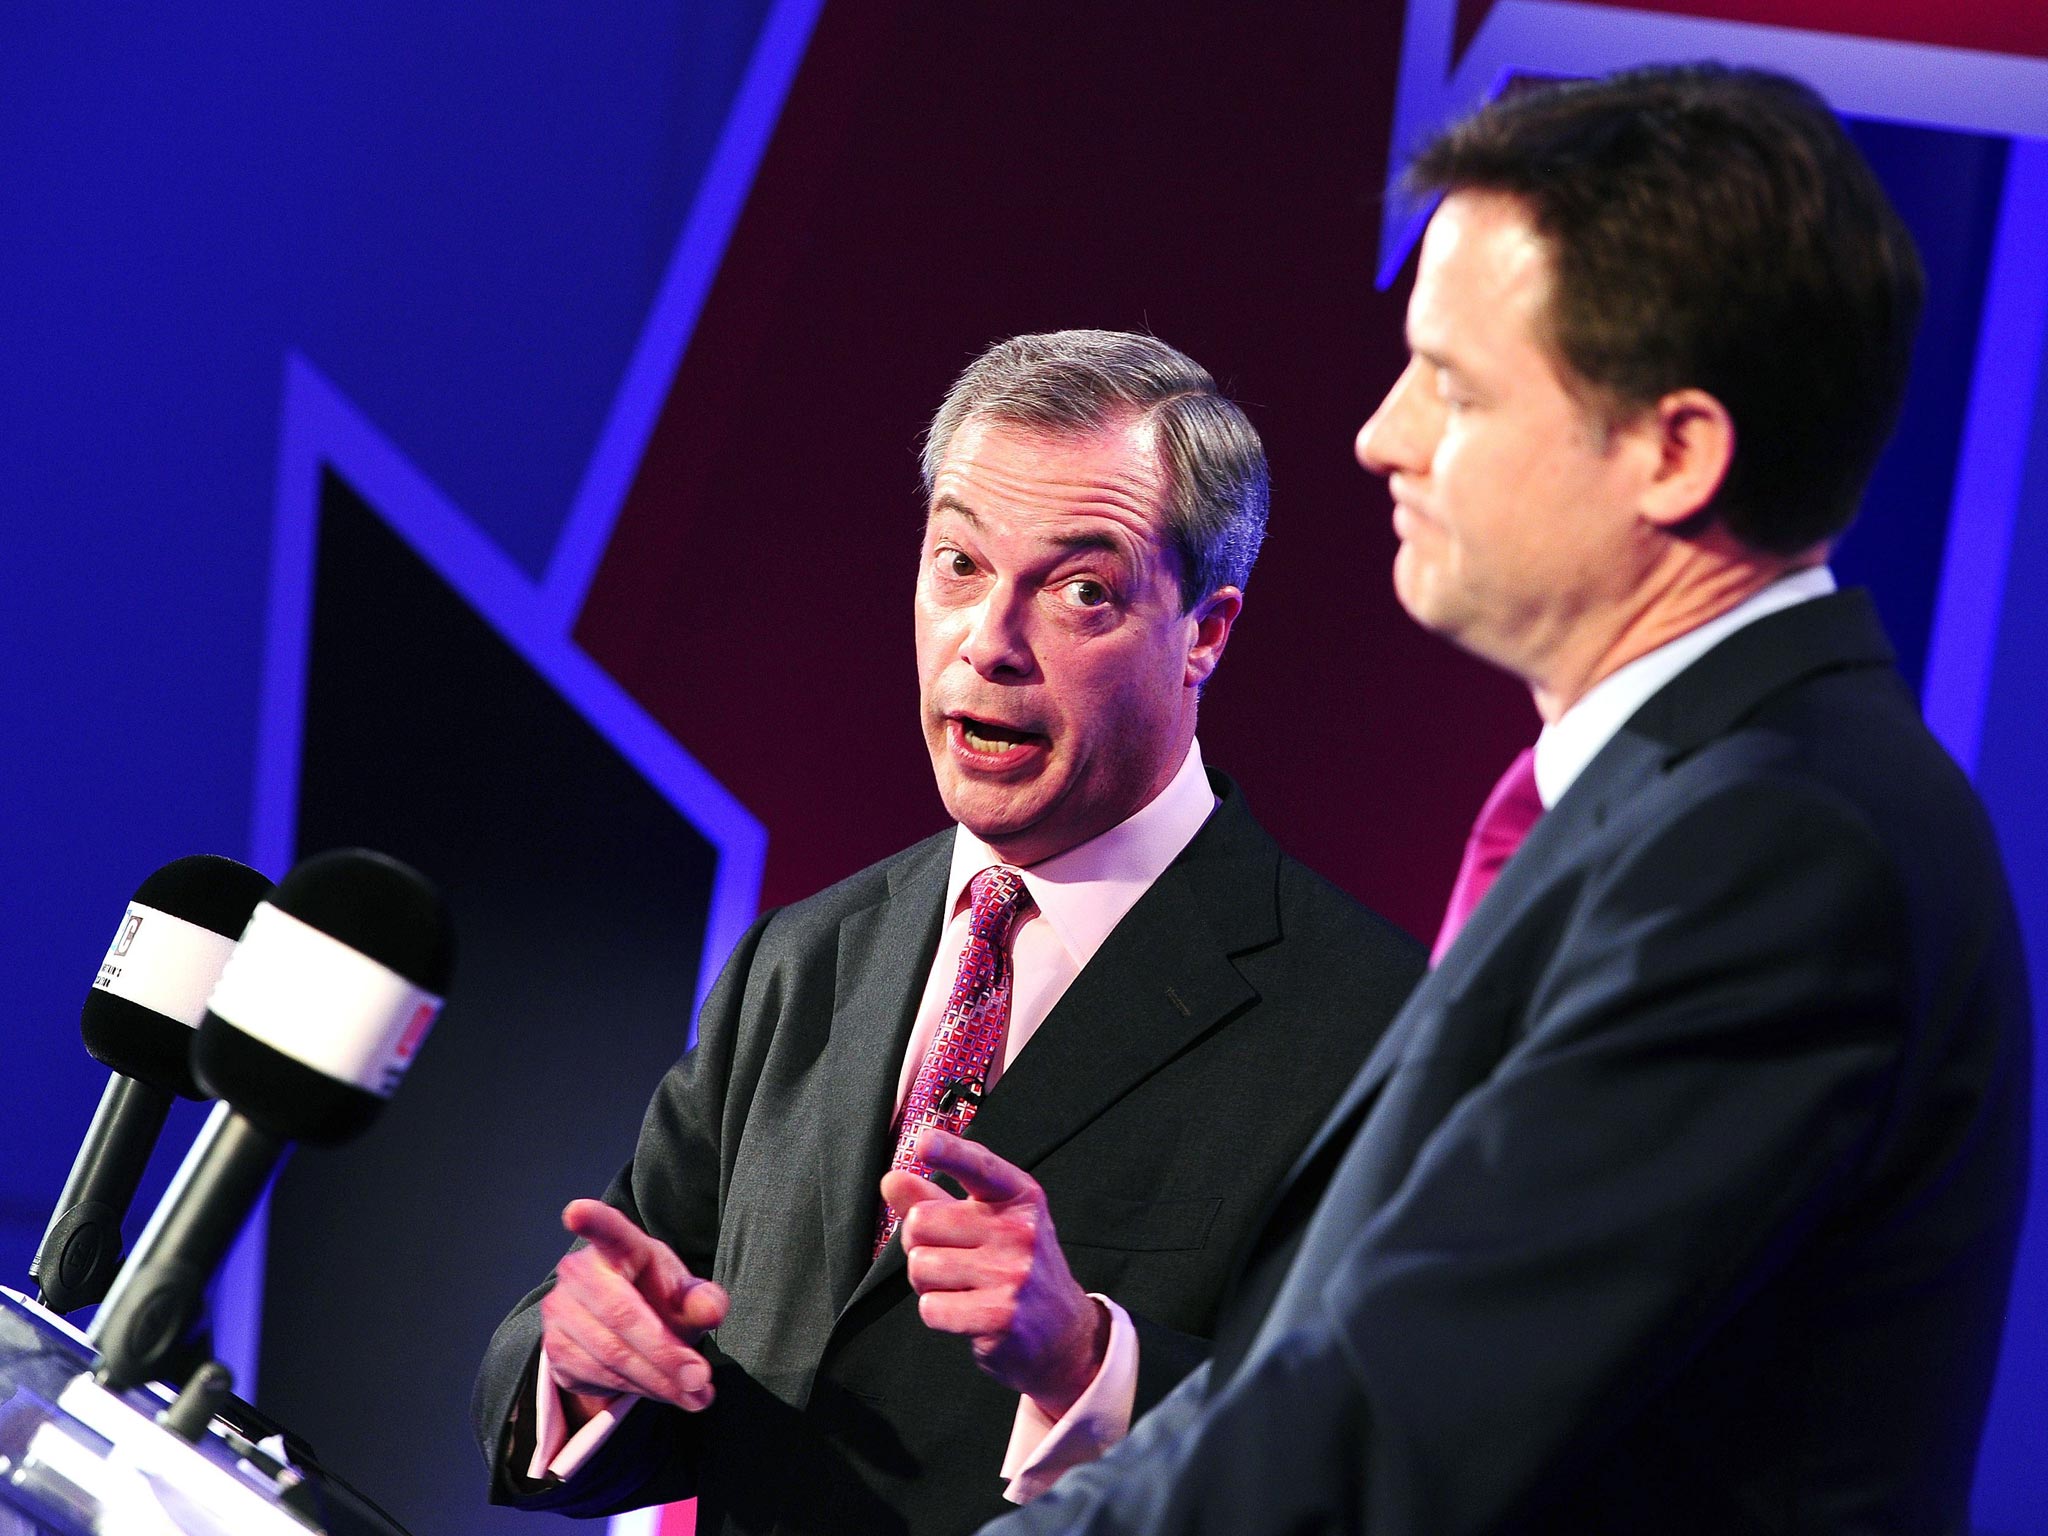 Nick Clegg and Nigel Farage take part in a debate over Britain's future in the European Union in London last week